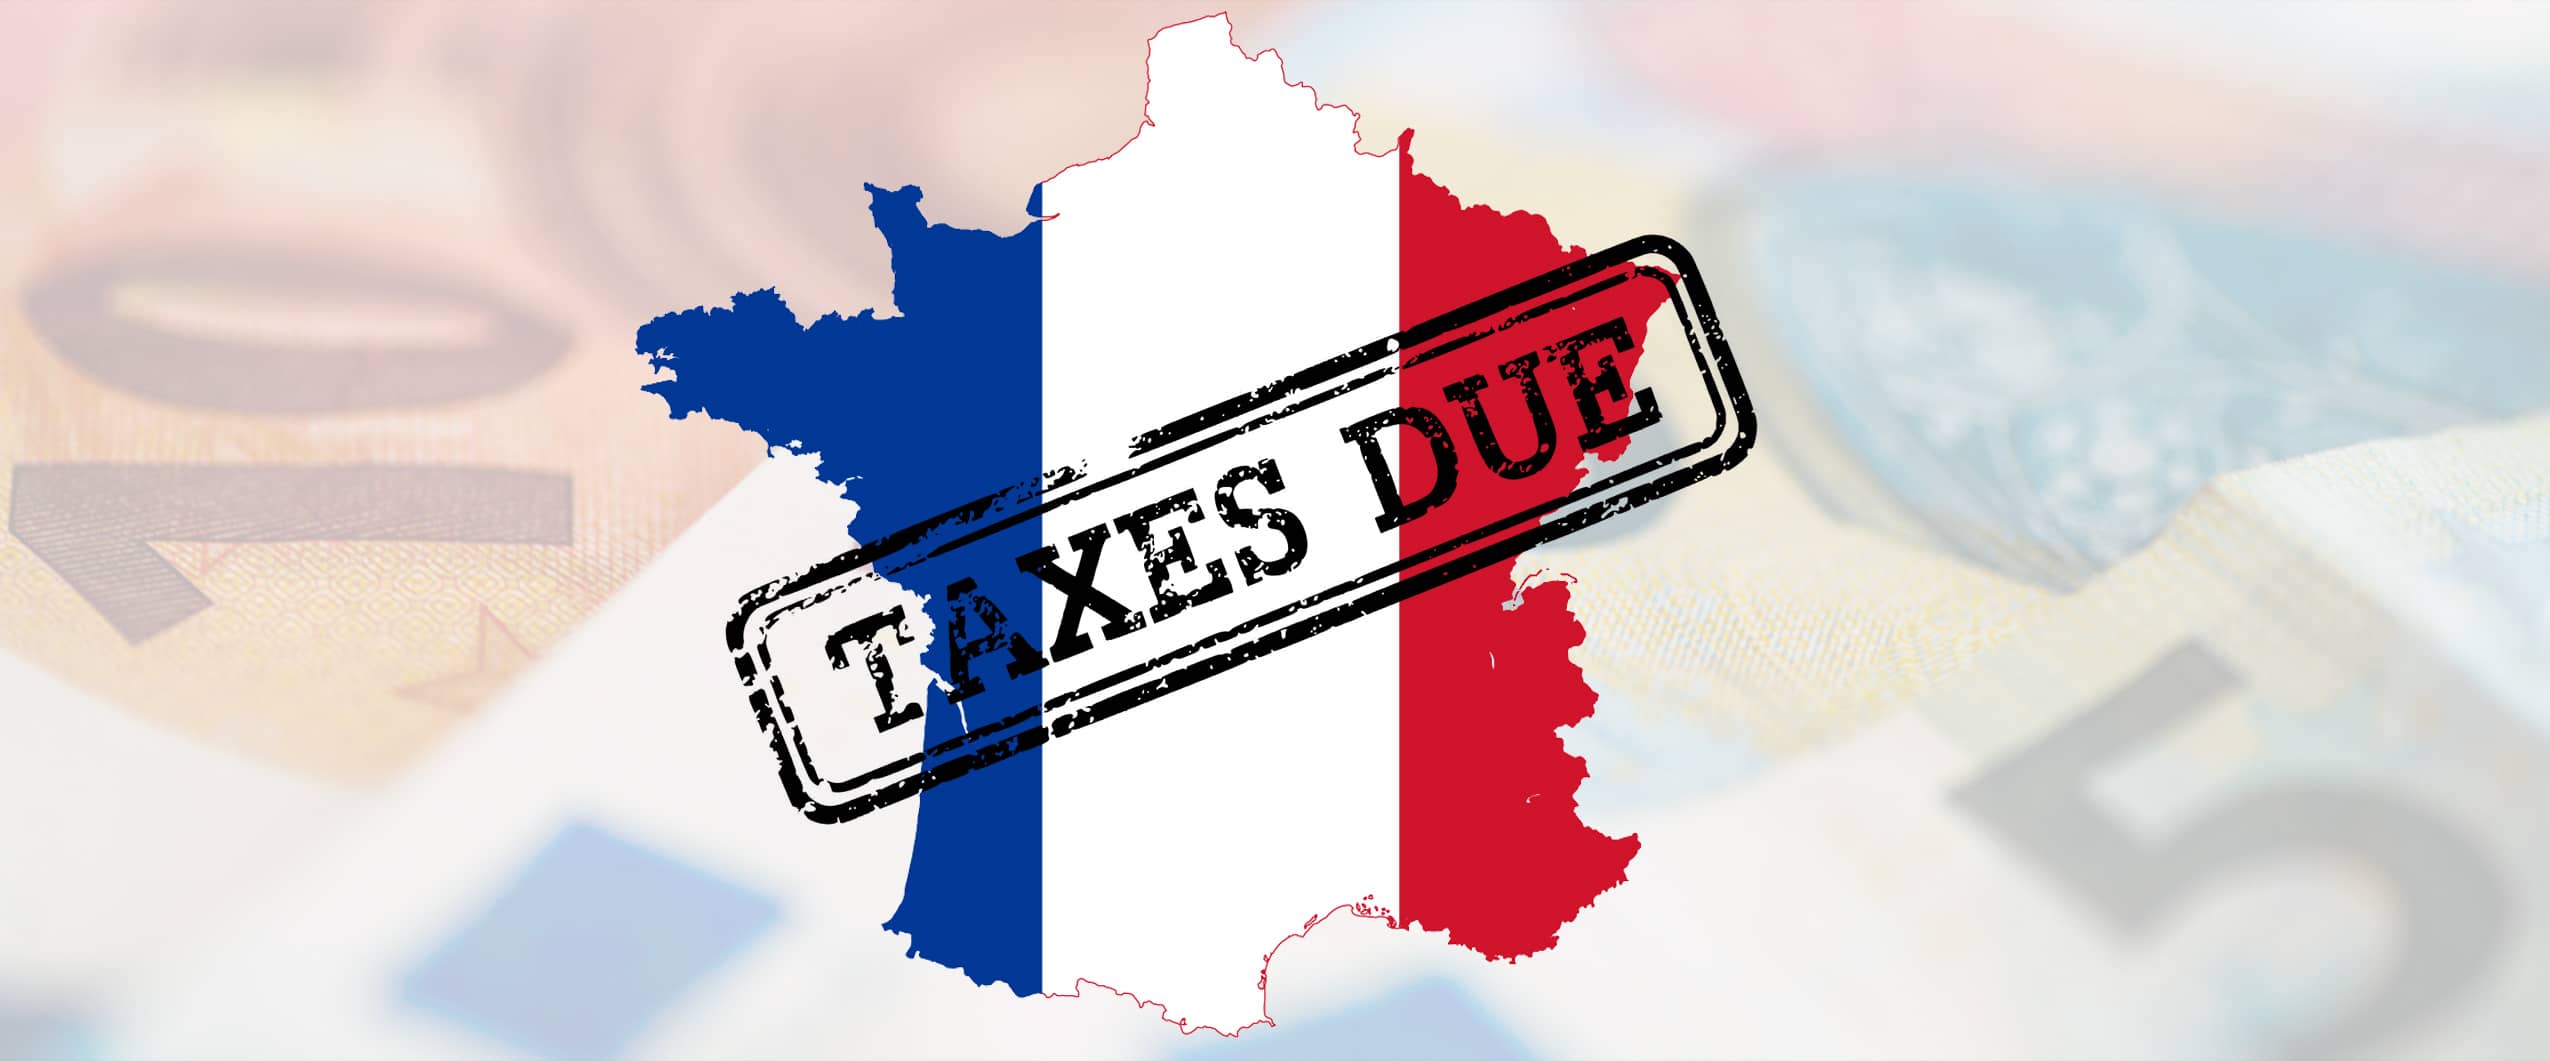 Taxes Due French flag and country